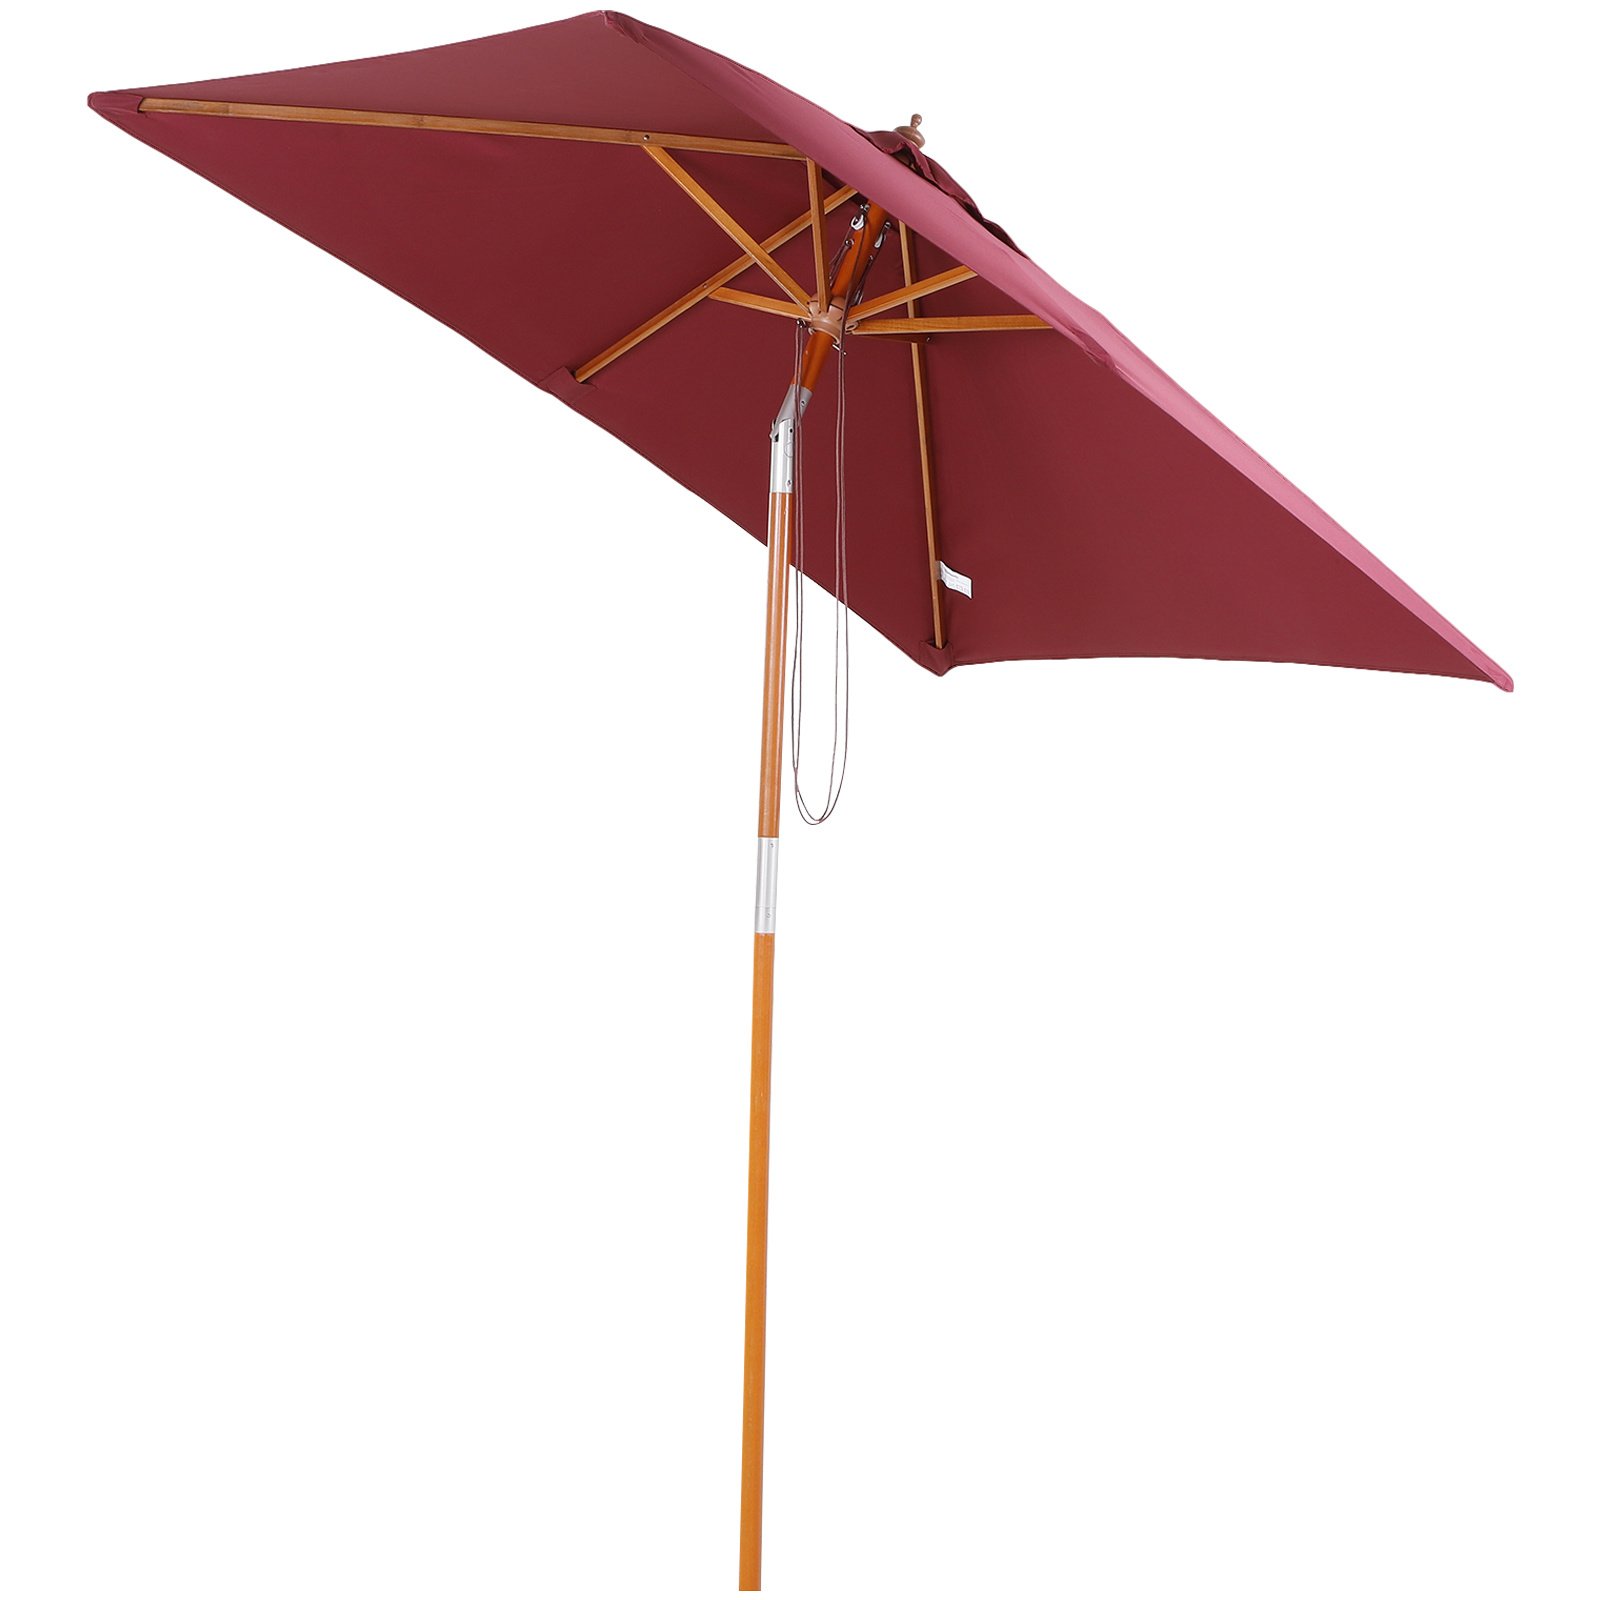 Sunny Parasol Tuinparasol Opvouwbaar 3-traps hout+polyester wijnrood